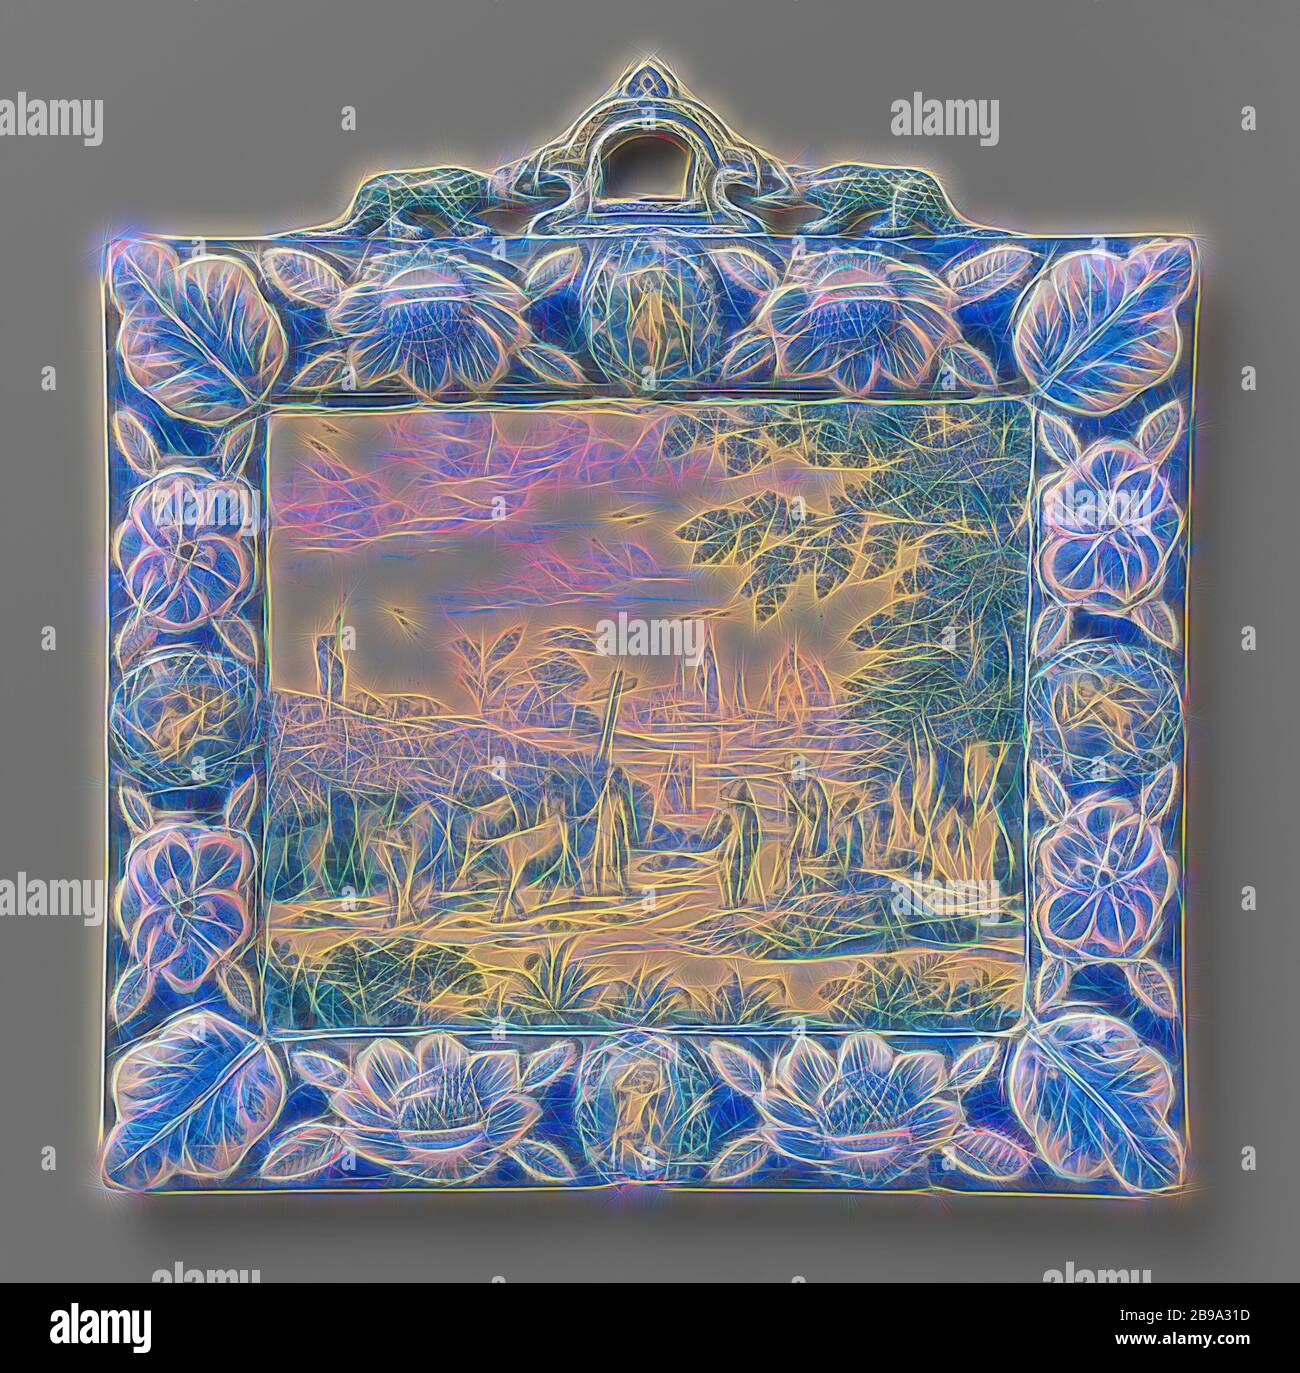 Two plates in frames, A plaque of Delftware, painted in blue with a landscape in a frame with embossed flowers, leaves and medallions. Brand: a big star, cattle driving, cattle driver, herding, herdsman, herdswoman, shepherd, shepherdess, cowherd, etc, landscapes in the temperate zone, De Witte Starre (attributed to), Delft, c. 1690 - c. 1705, earthenware, h 39 cm × w 37.5 cm, Reimagined by Gibon, design of warm cheerful glowing of brightness and light rays radiance. Classic art reinvented with a modern twist. Photography inspired by futurism, embracing dynamic energy of modern technology, mov Stock Photo